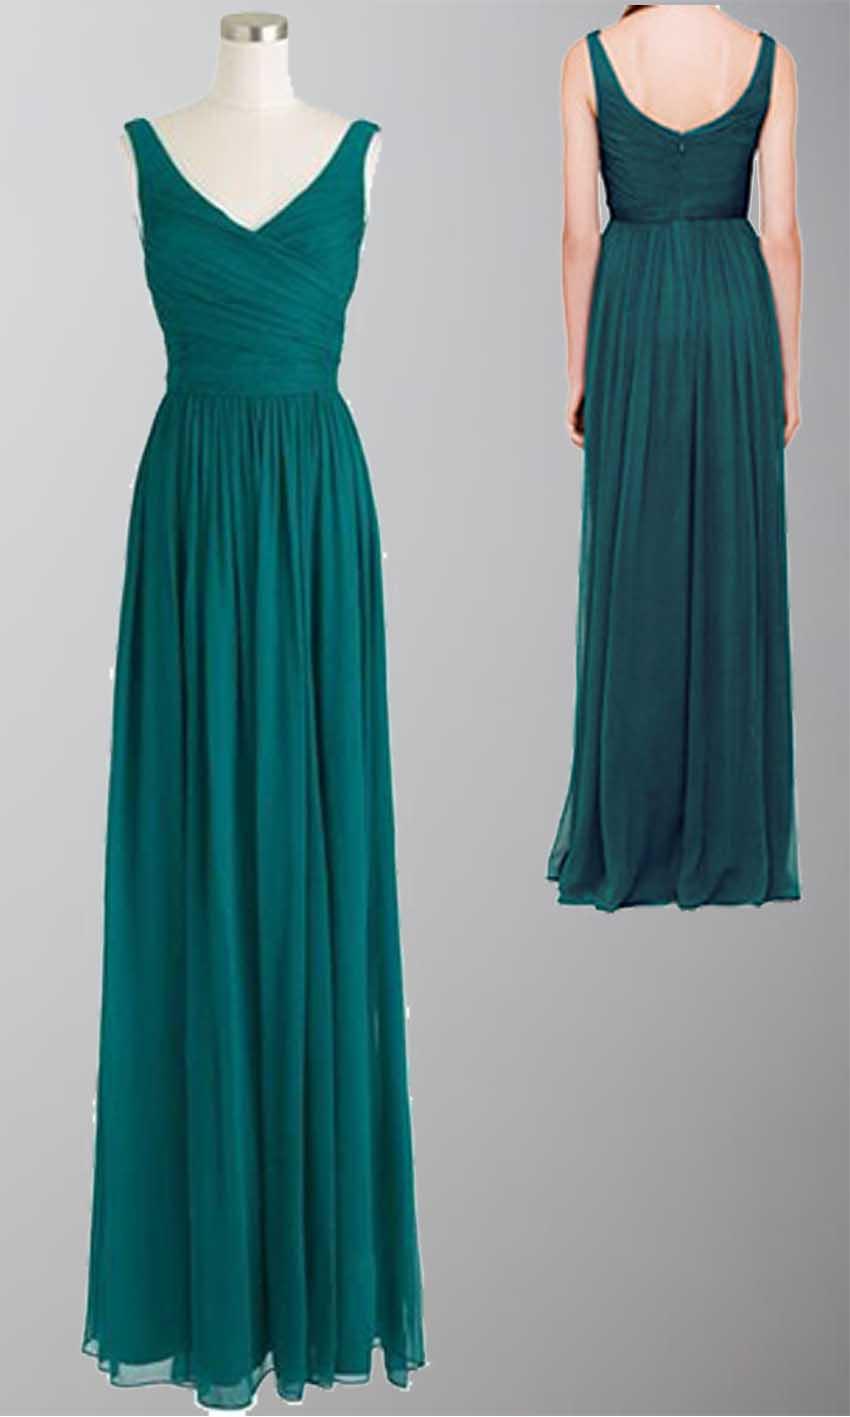 Wedding - Long Chiffon Rich Peacock Bridesmaid Dresses KSP177 [KSP177] - £92.00 : Cheap Prom Dresses Uk, Bridesmaid Dresses, 2014 Prom & Evening Dresses, Look for cheap elegant prom dresses 2014, cocktail gowns, or dresses for special occasions? kissprom.co.uk offe